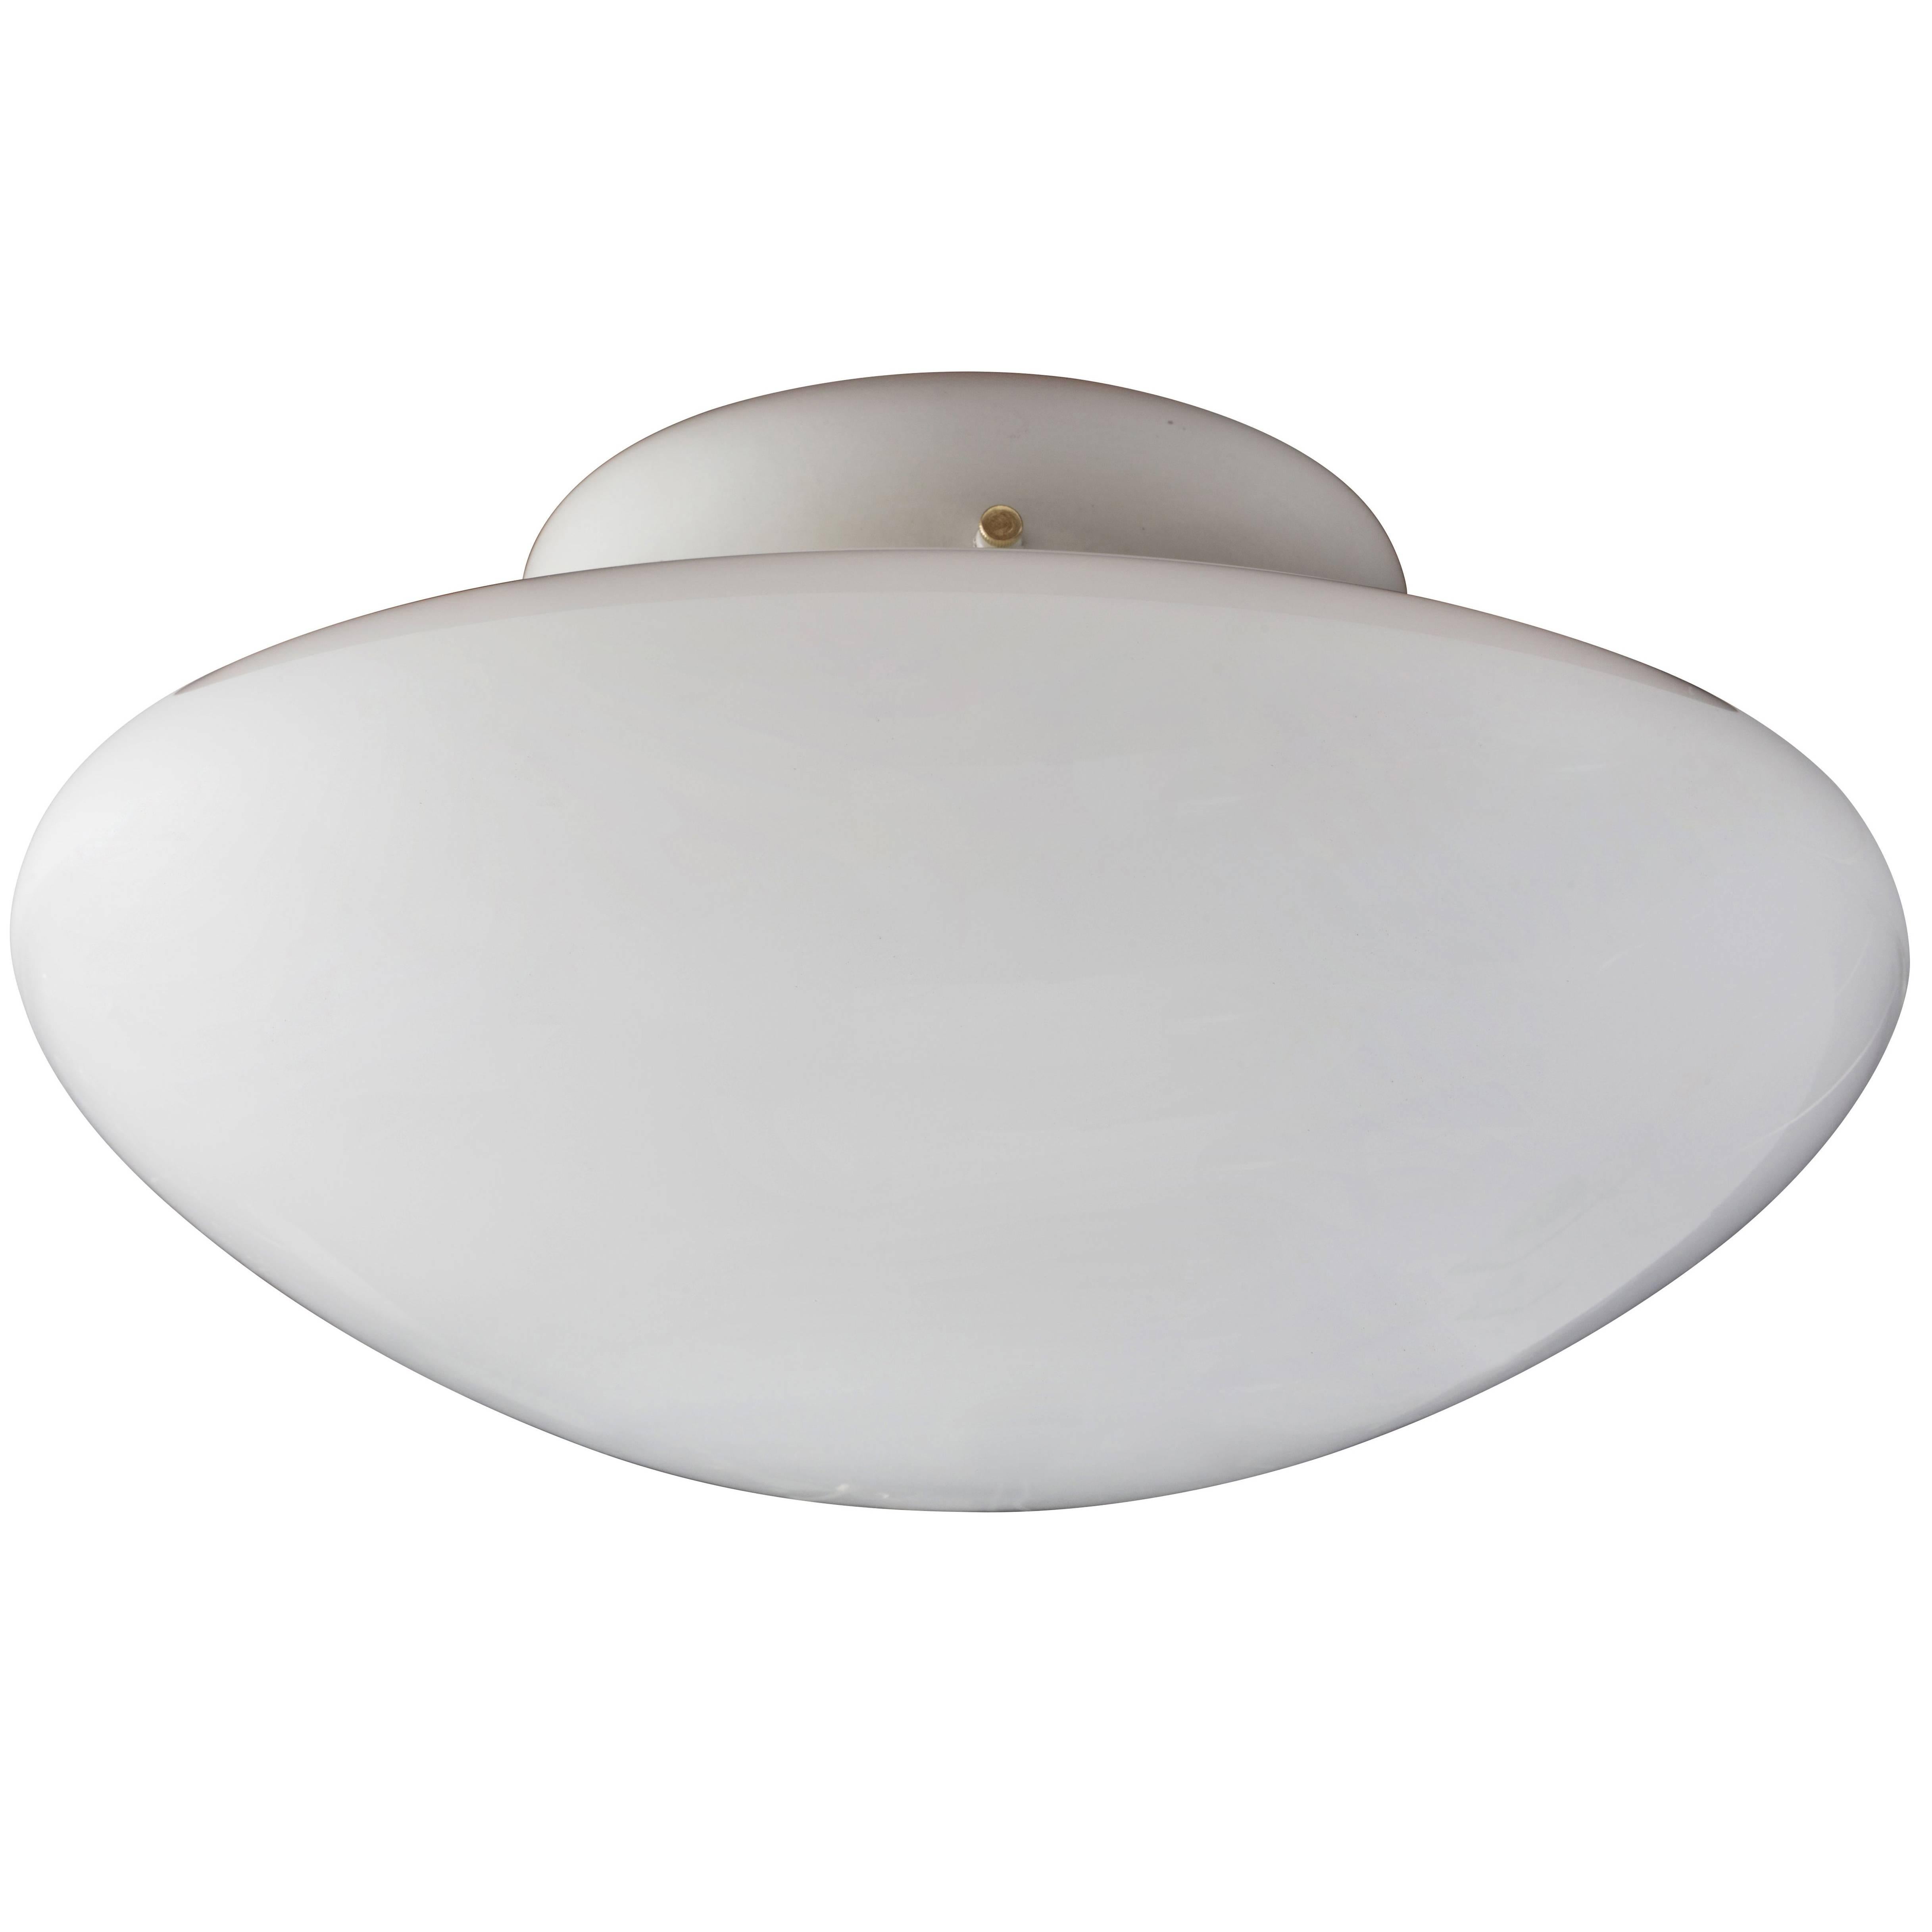 Large Sergio Mazza 'Magnolia' ceiling lamp for Quattrifolio, circa 1971. Executed in a seemingly floating bilious hand blown opaline glass shade below a Minimalist white enameled metal base for Quattrifolio, Italy. An extremely clean and sculptural